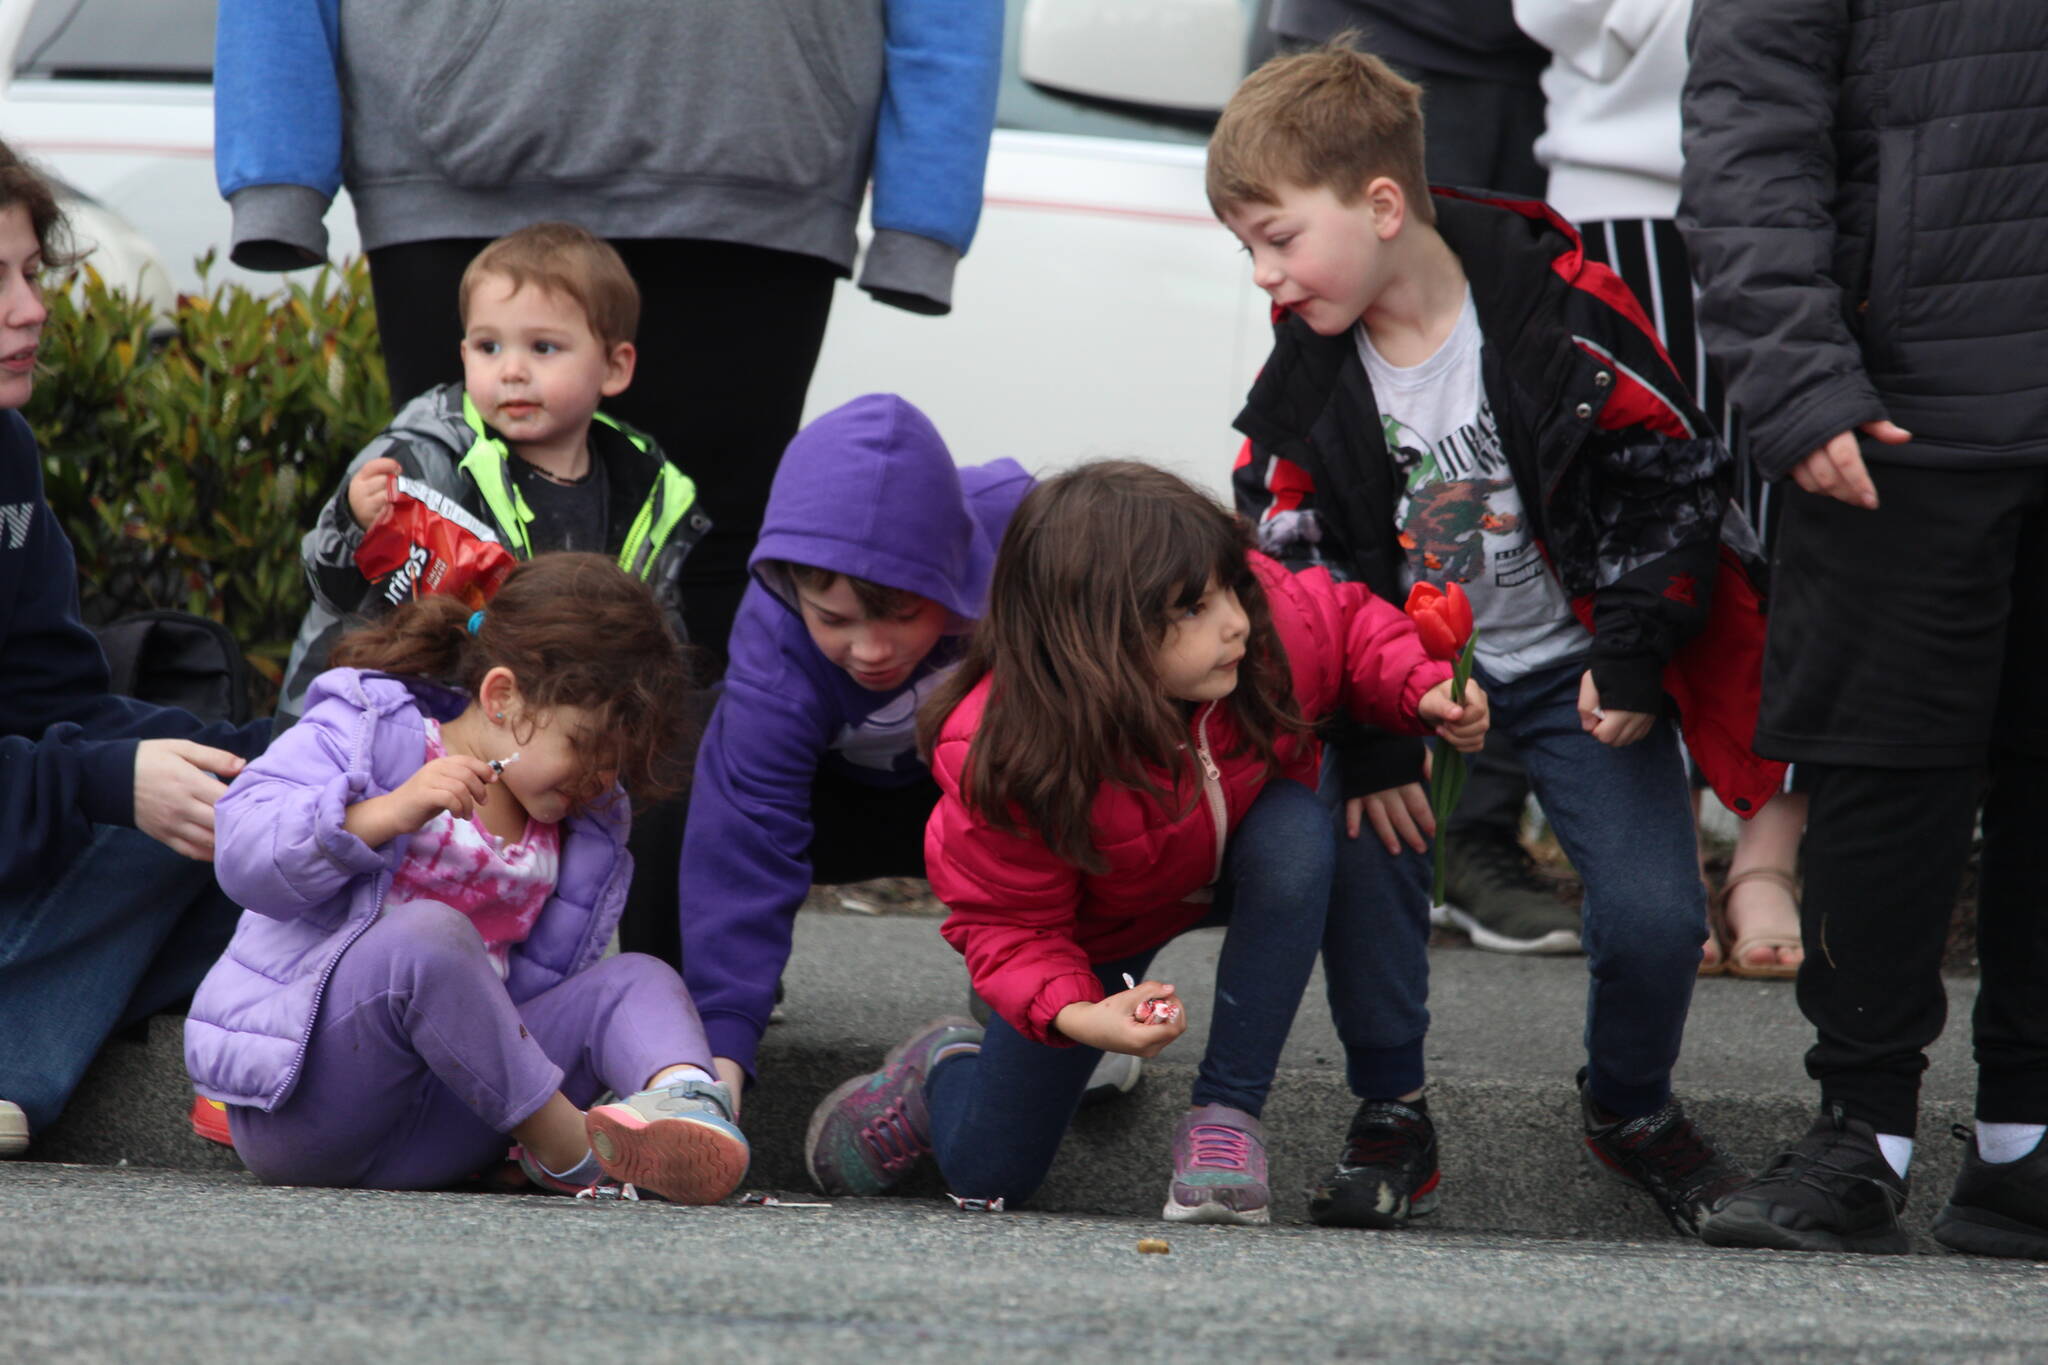 Kids scramble for candy thrown by parade participants. (Photo by Karina Andrew/Whidbey News-Times)